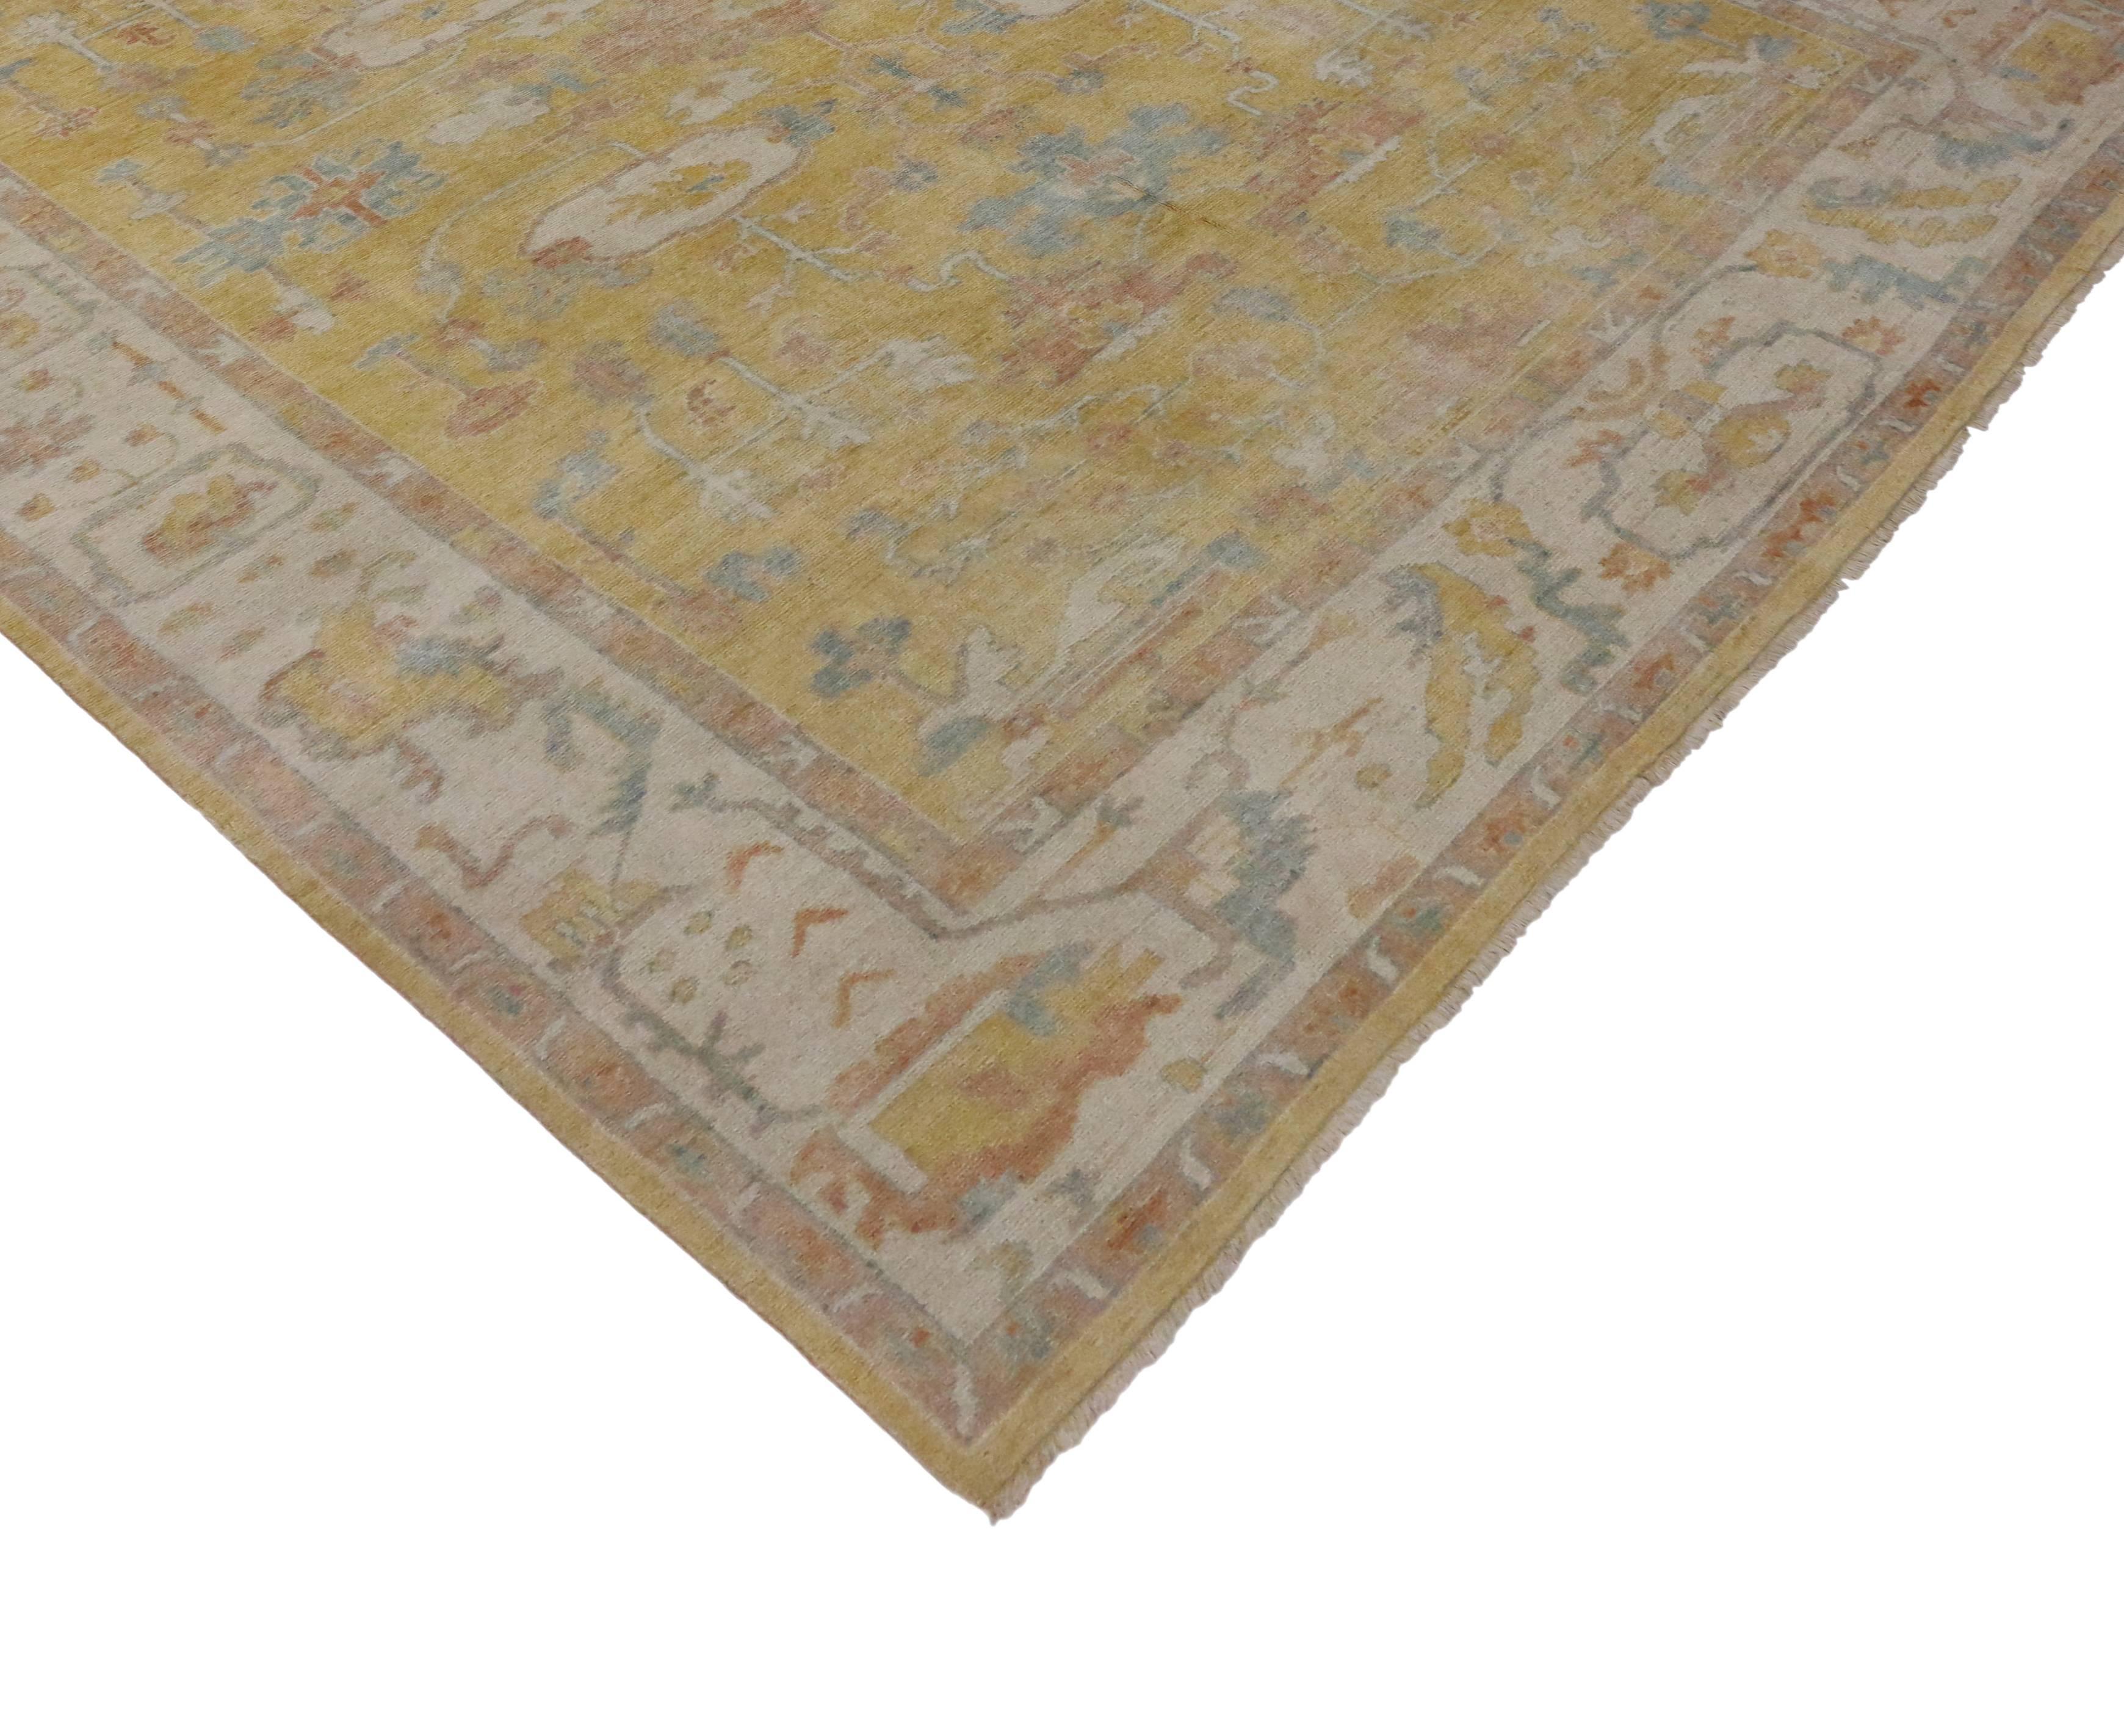 Infuse your favorite room in the house with the soft, warm glow from this modern yellow Oushak rug. Features a transitional style with a golden yellow field surrounded by geometric motifs and a low contrasting beige border. Color palette consists of